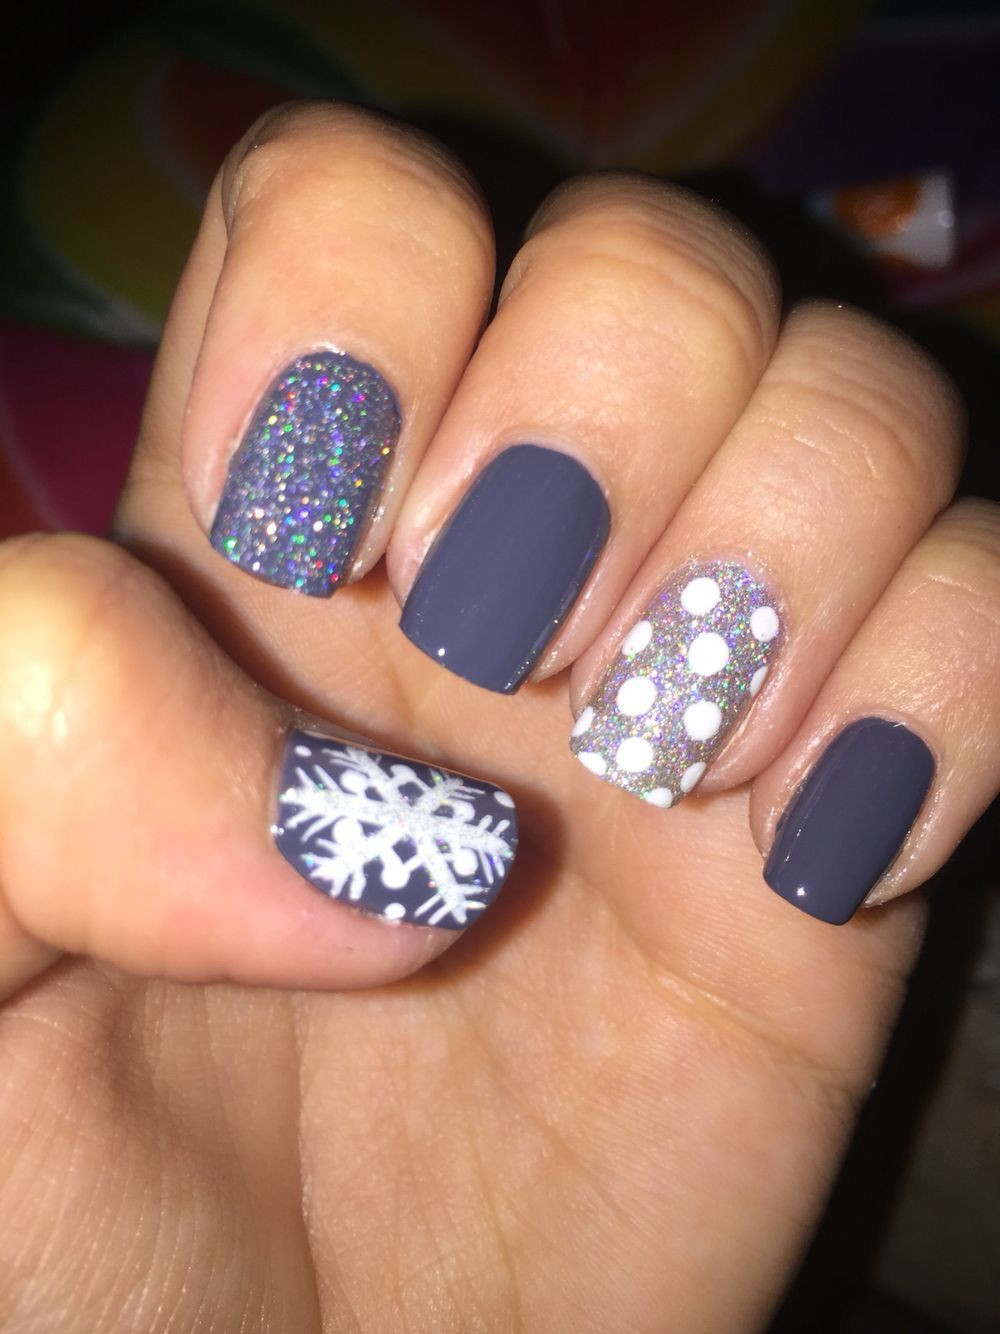 Christmas Gel Nail Ideas
 Pin by Kimberly Hannan on Nails hair and clothes in 2019